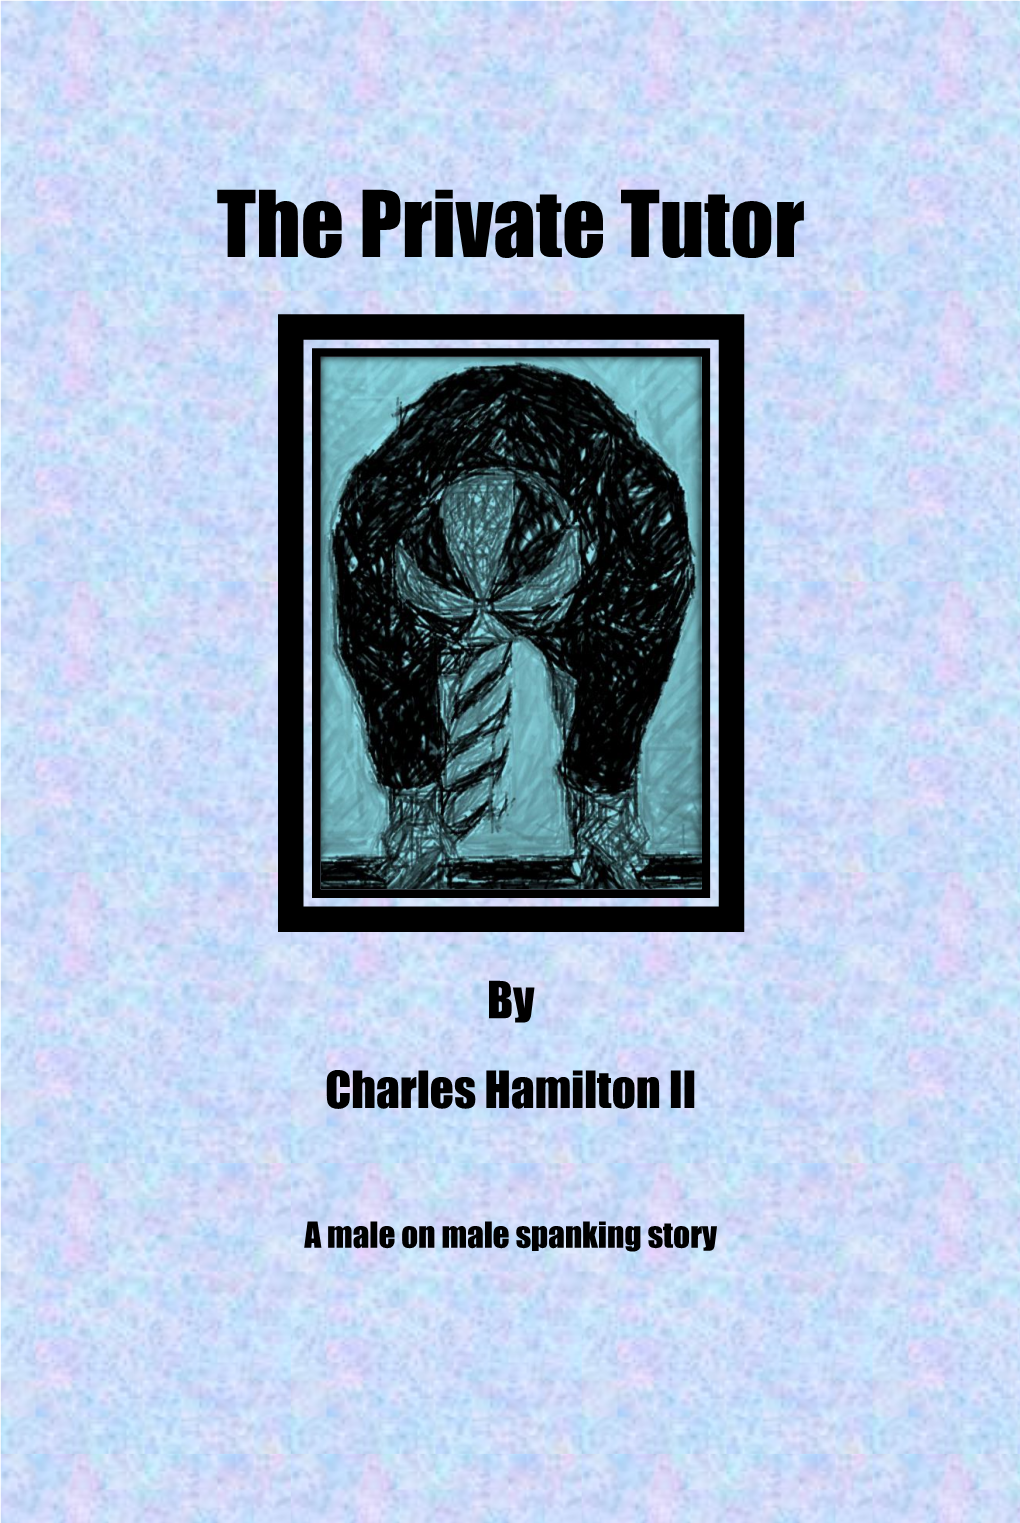 The Private Tutor by Charles Hamilton II